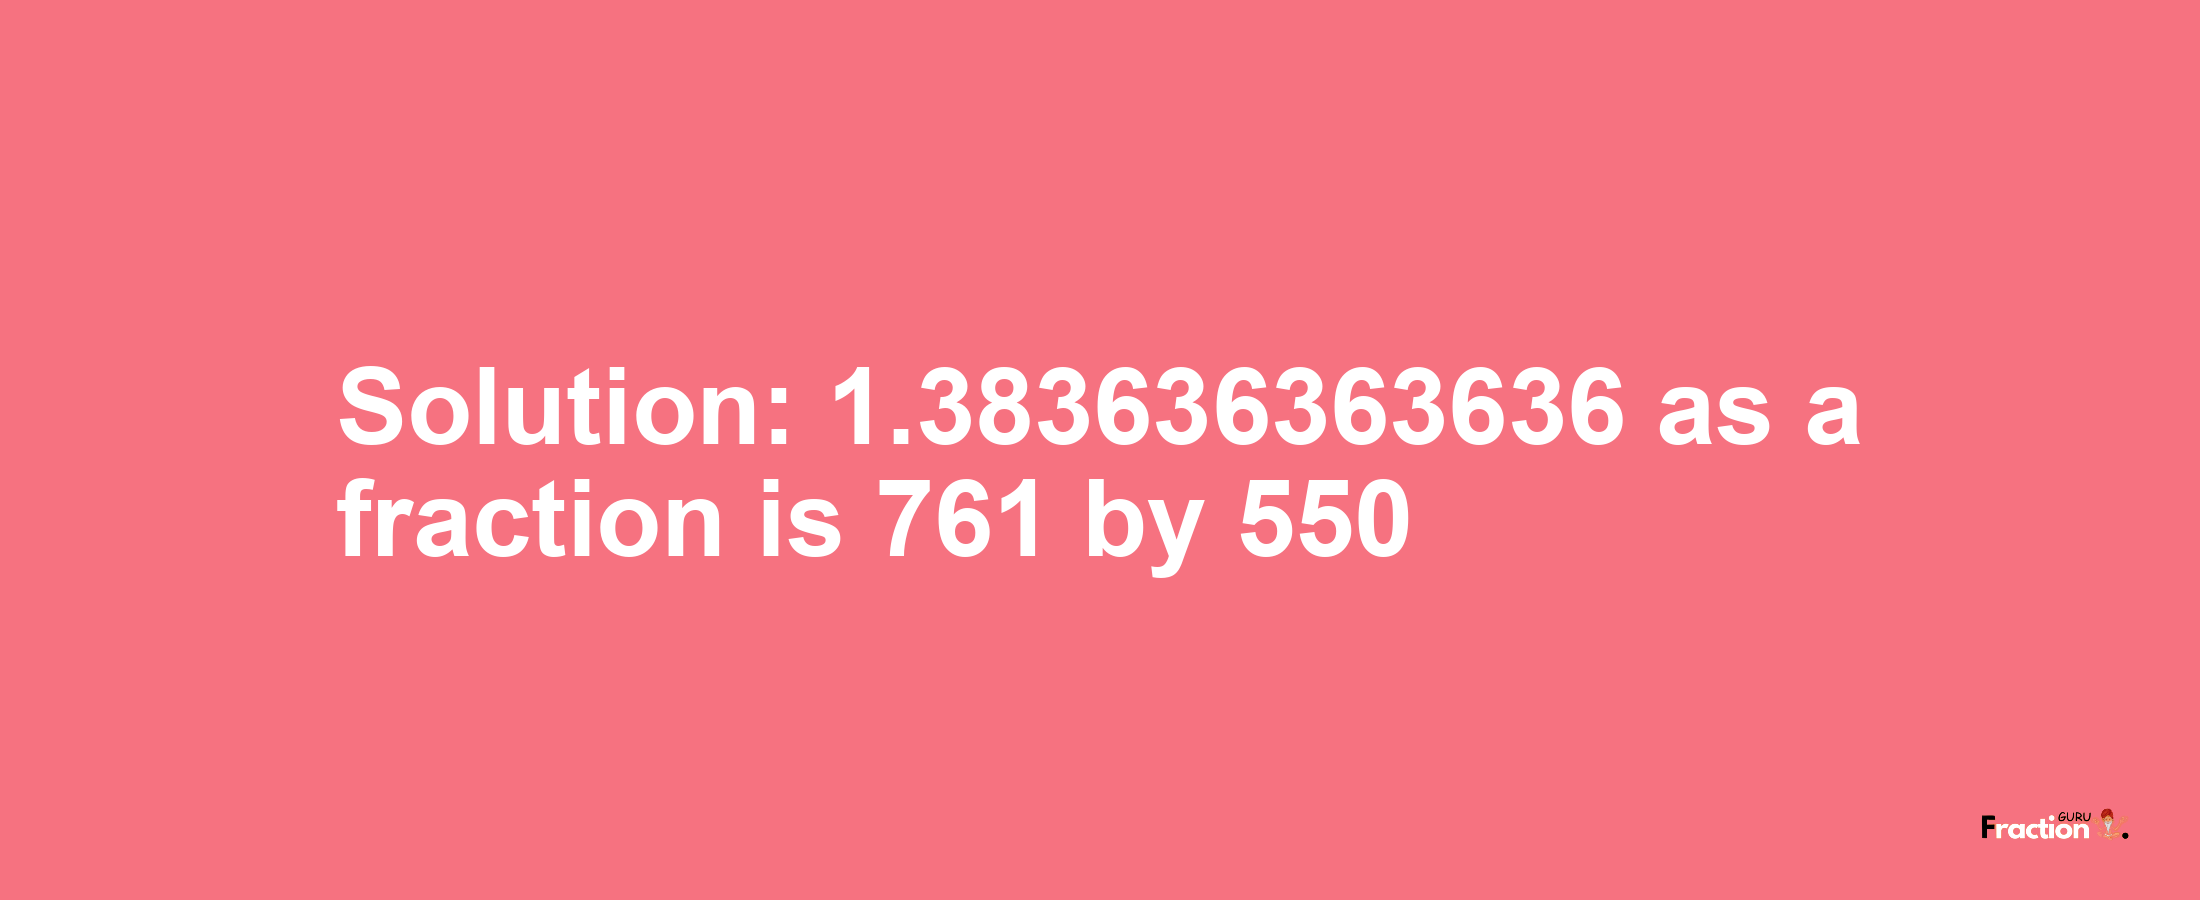 Solution:1.383636363636 as a fraction is 761/550